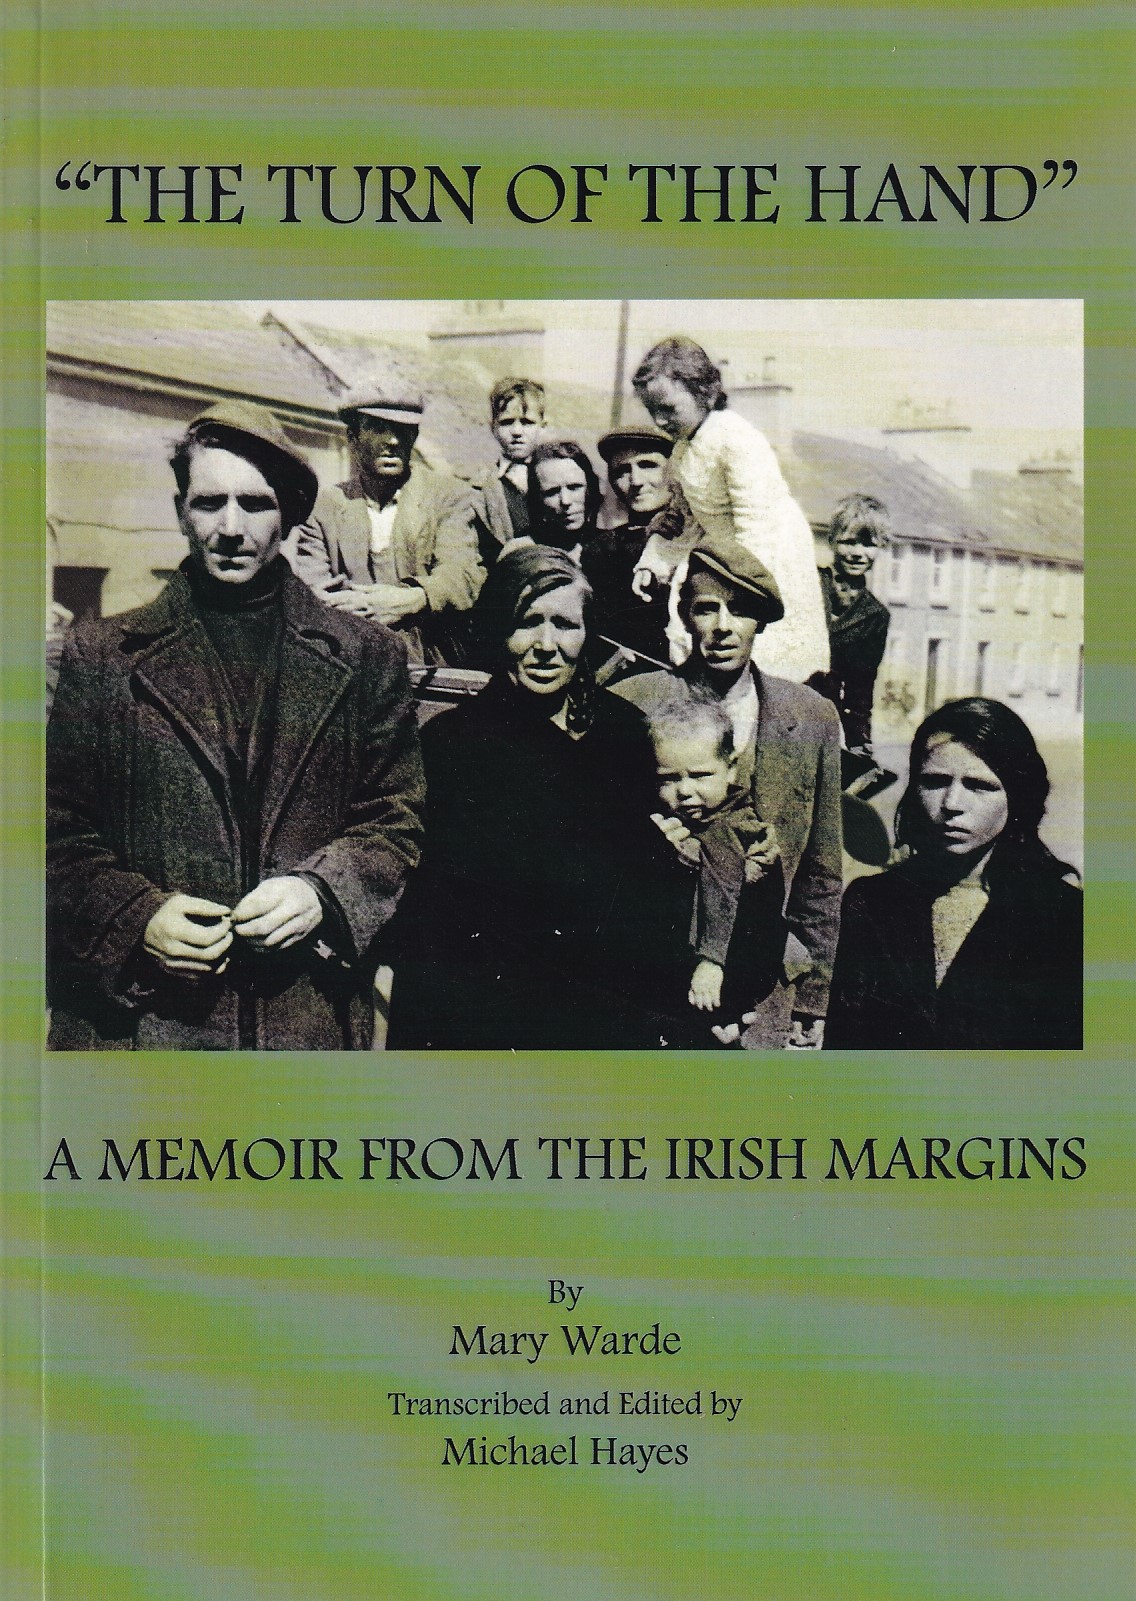 “The Turn Of The Hand”: A Memoir From The Irish Margins by Mary Warde (trans. & ed. Michael Hayes)